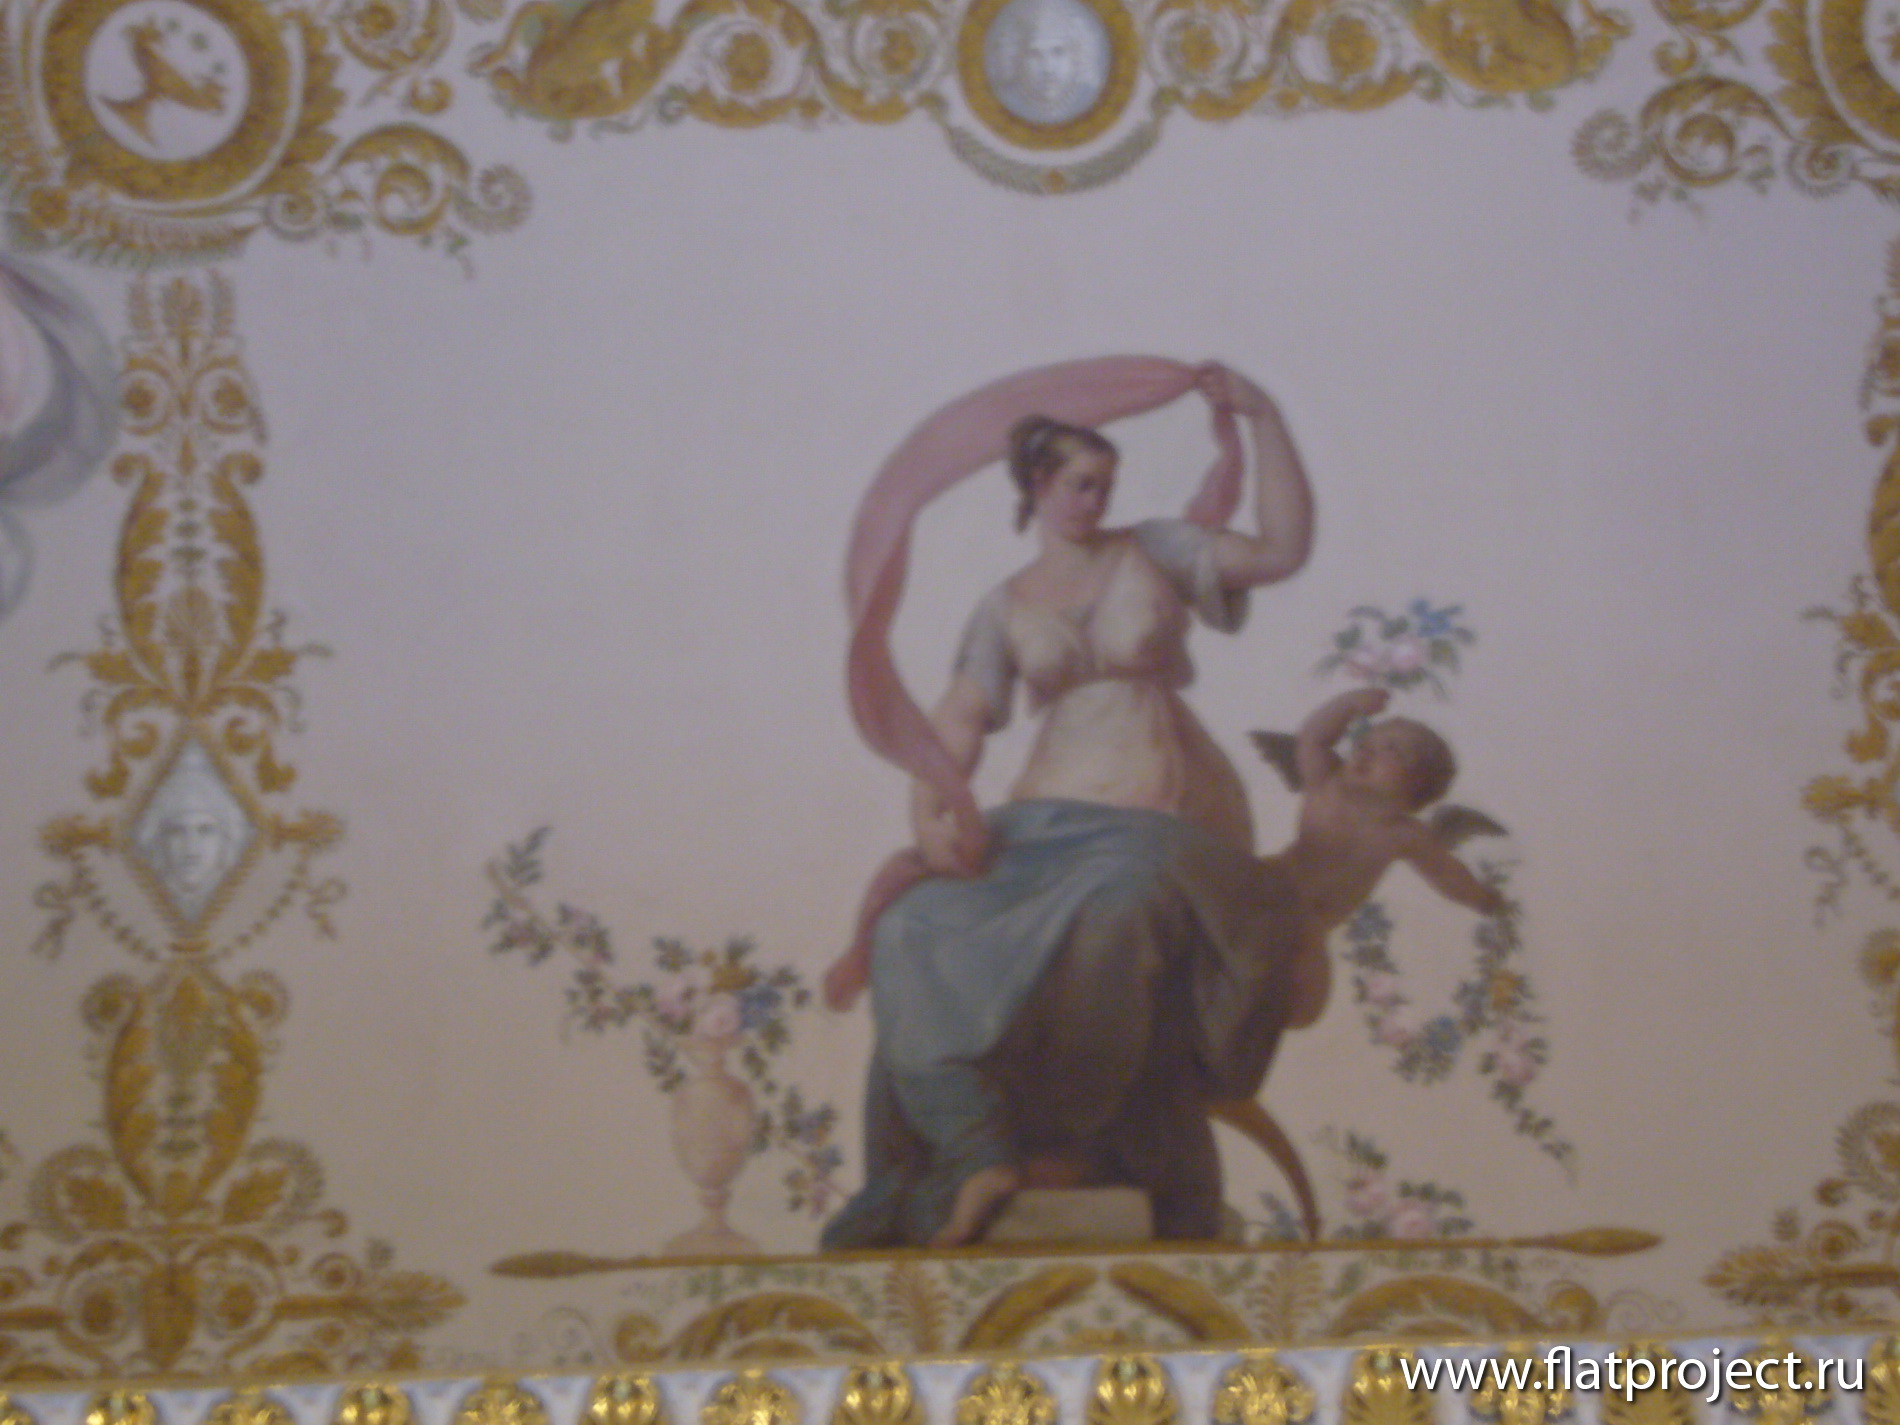 The State Russian museum interiors – photo 108